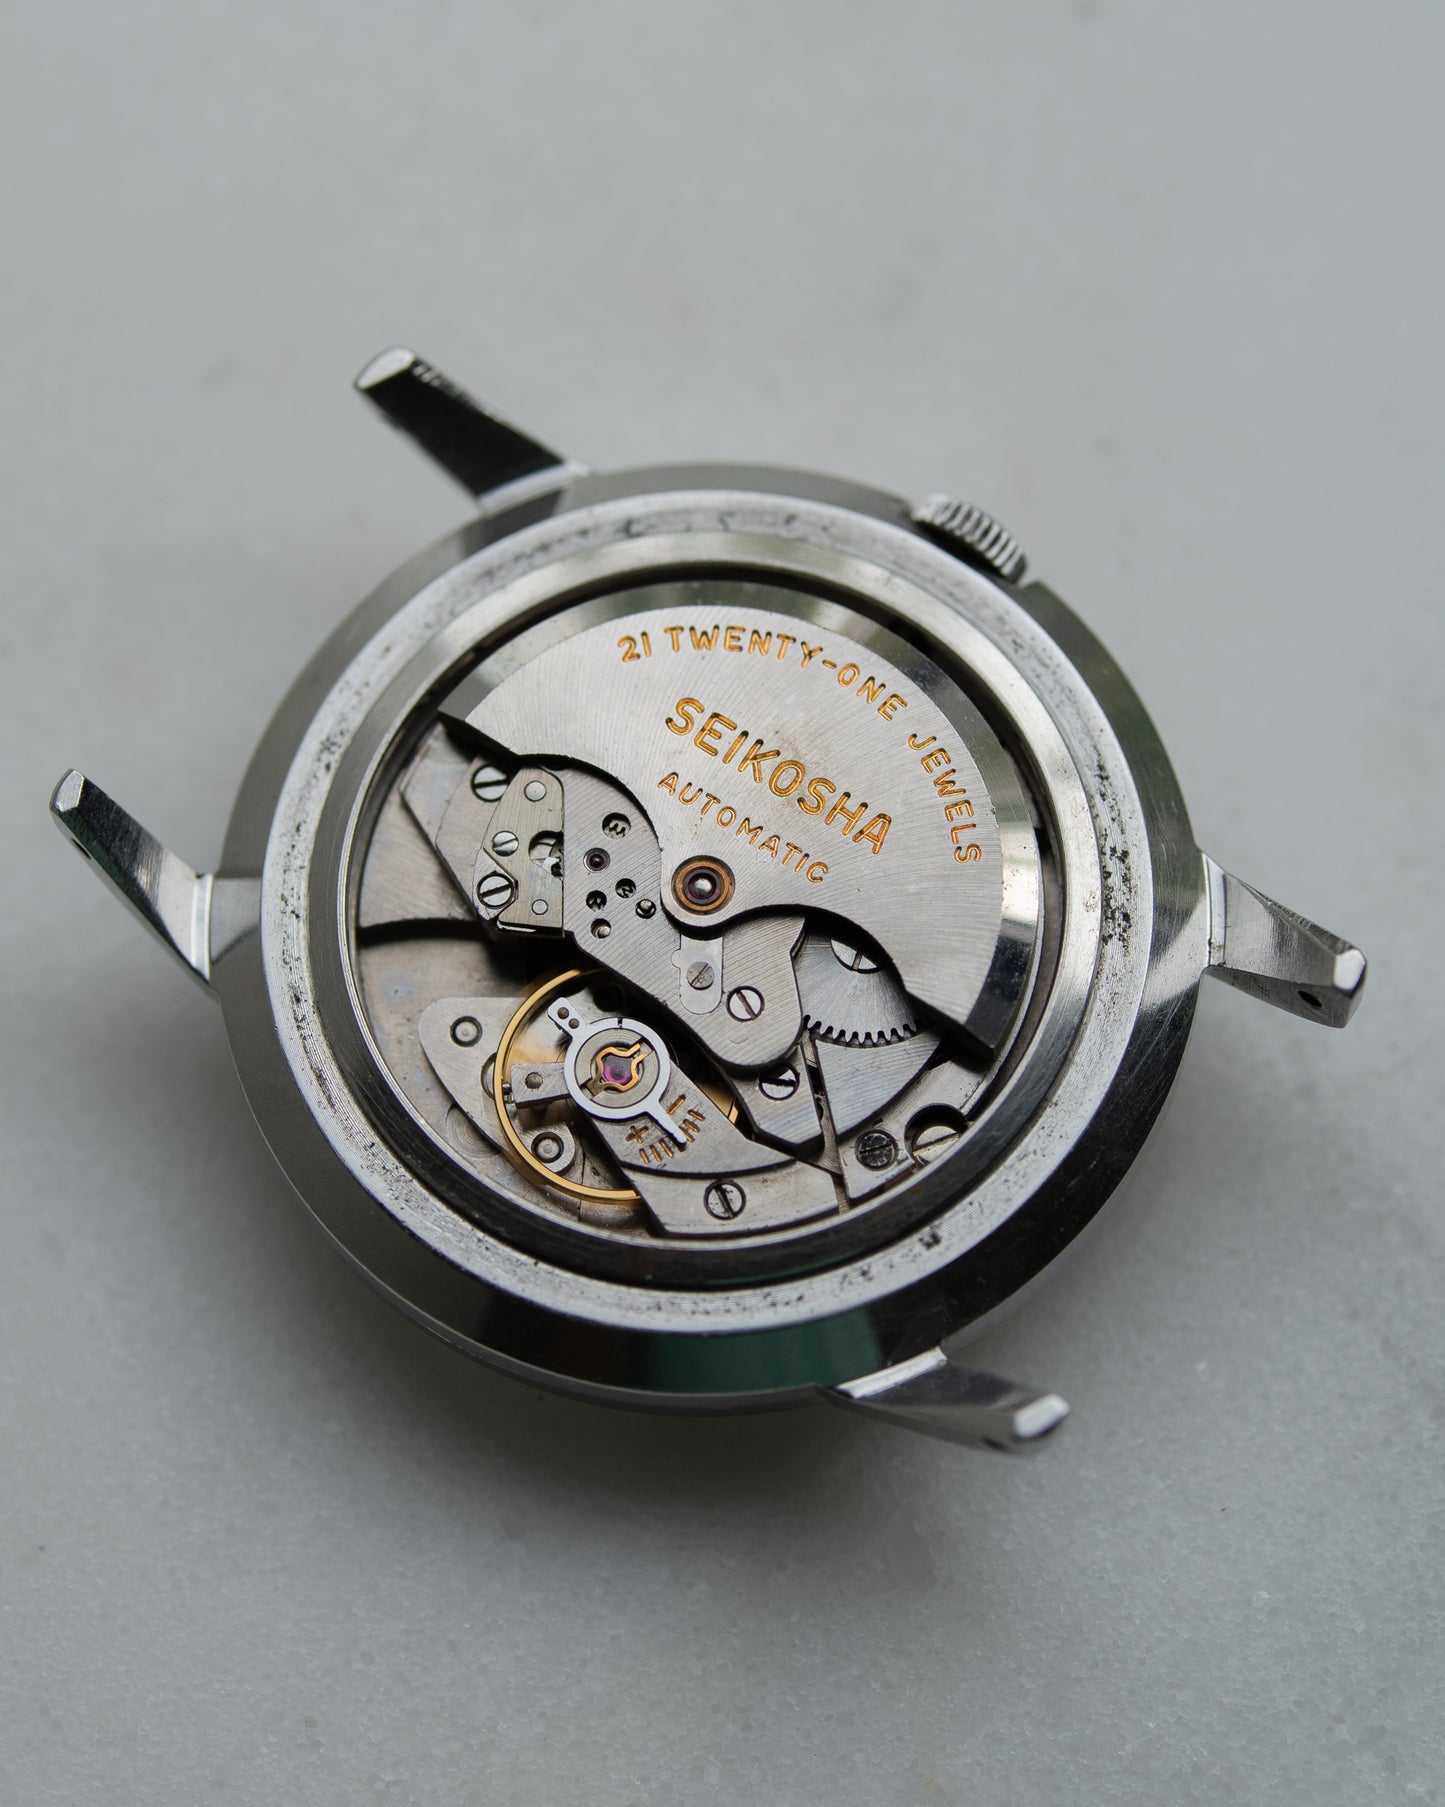 Seiko 11a Indicator "Special Dial" in Stainless Steel March 1959